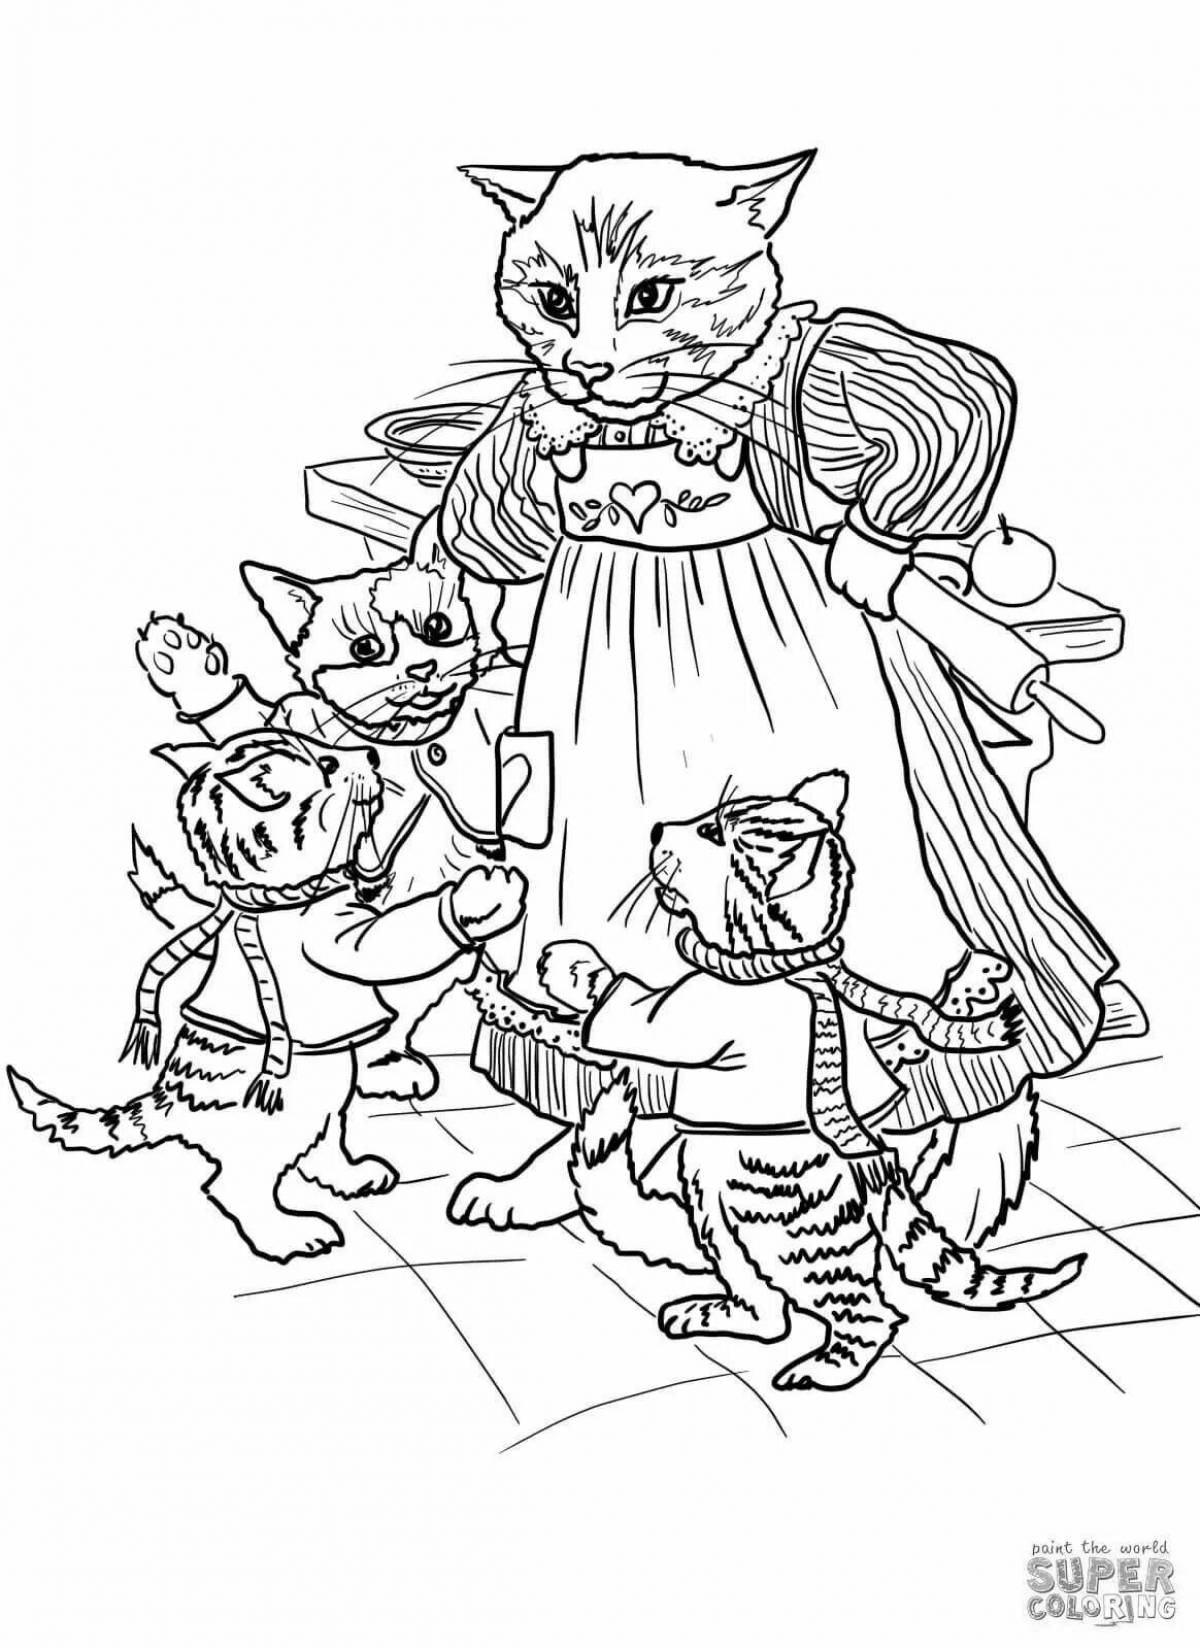 Unusual cat house coloring page for juniors